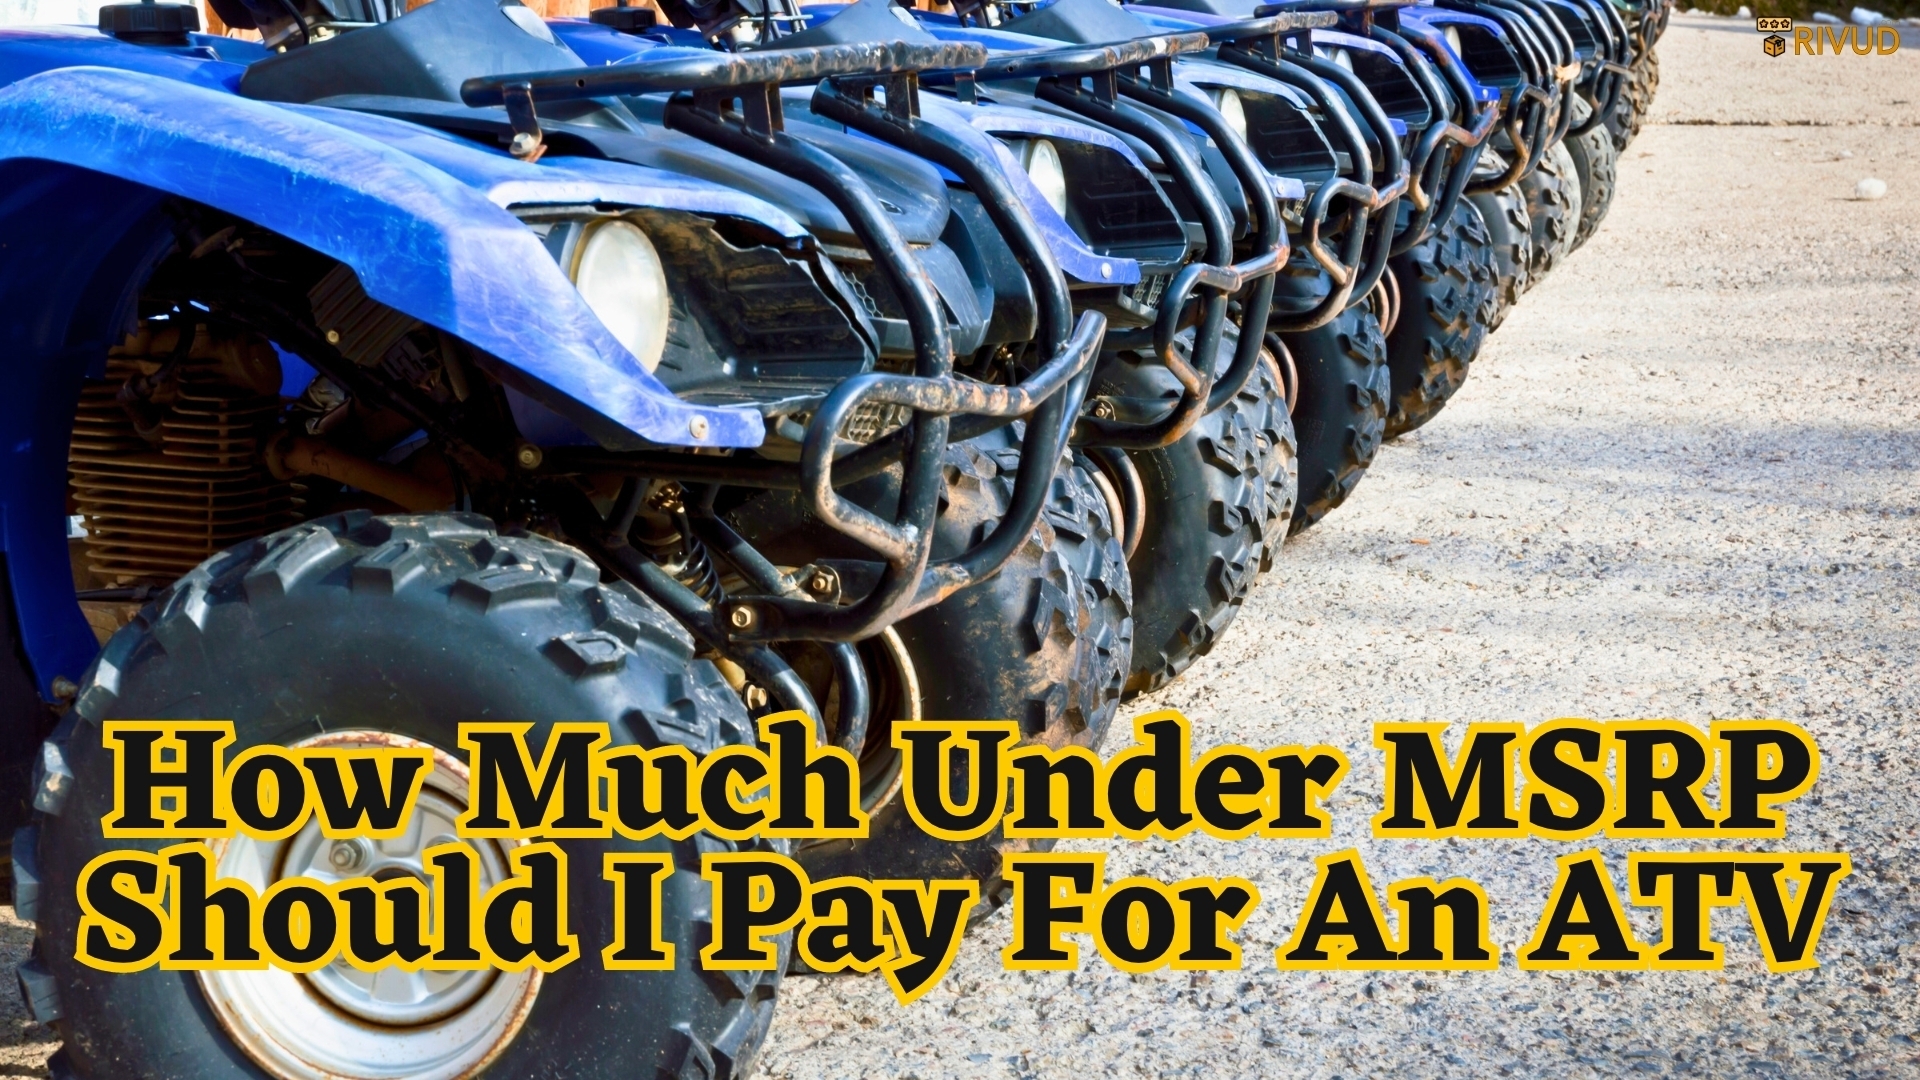 How Much Under Msrp Should I Pay For An Atv?